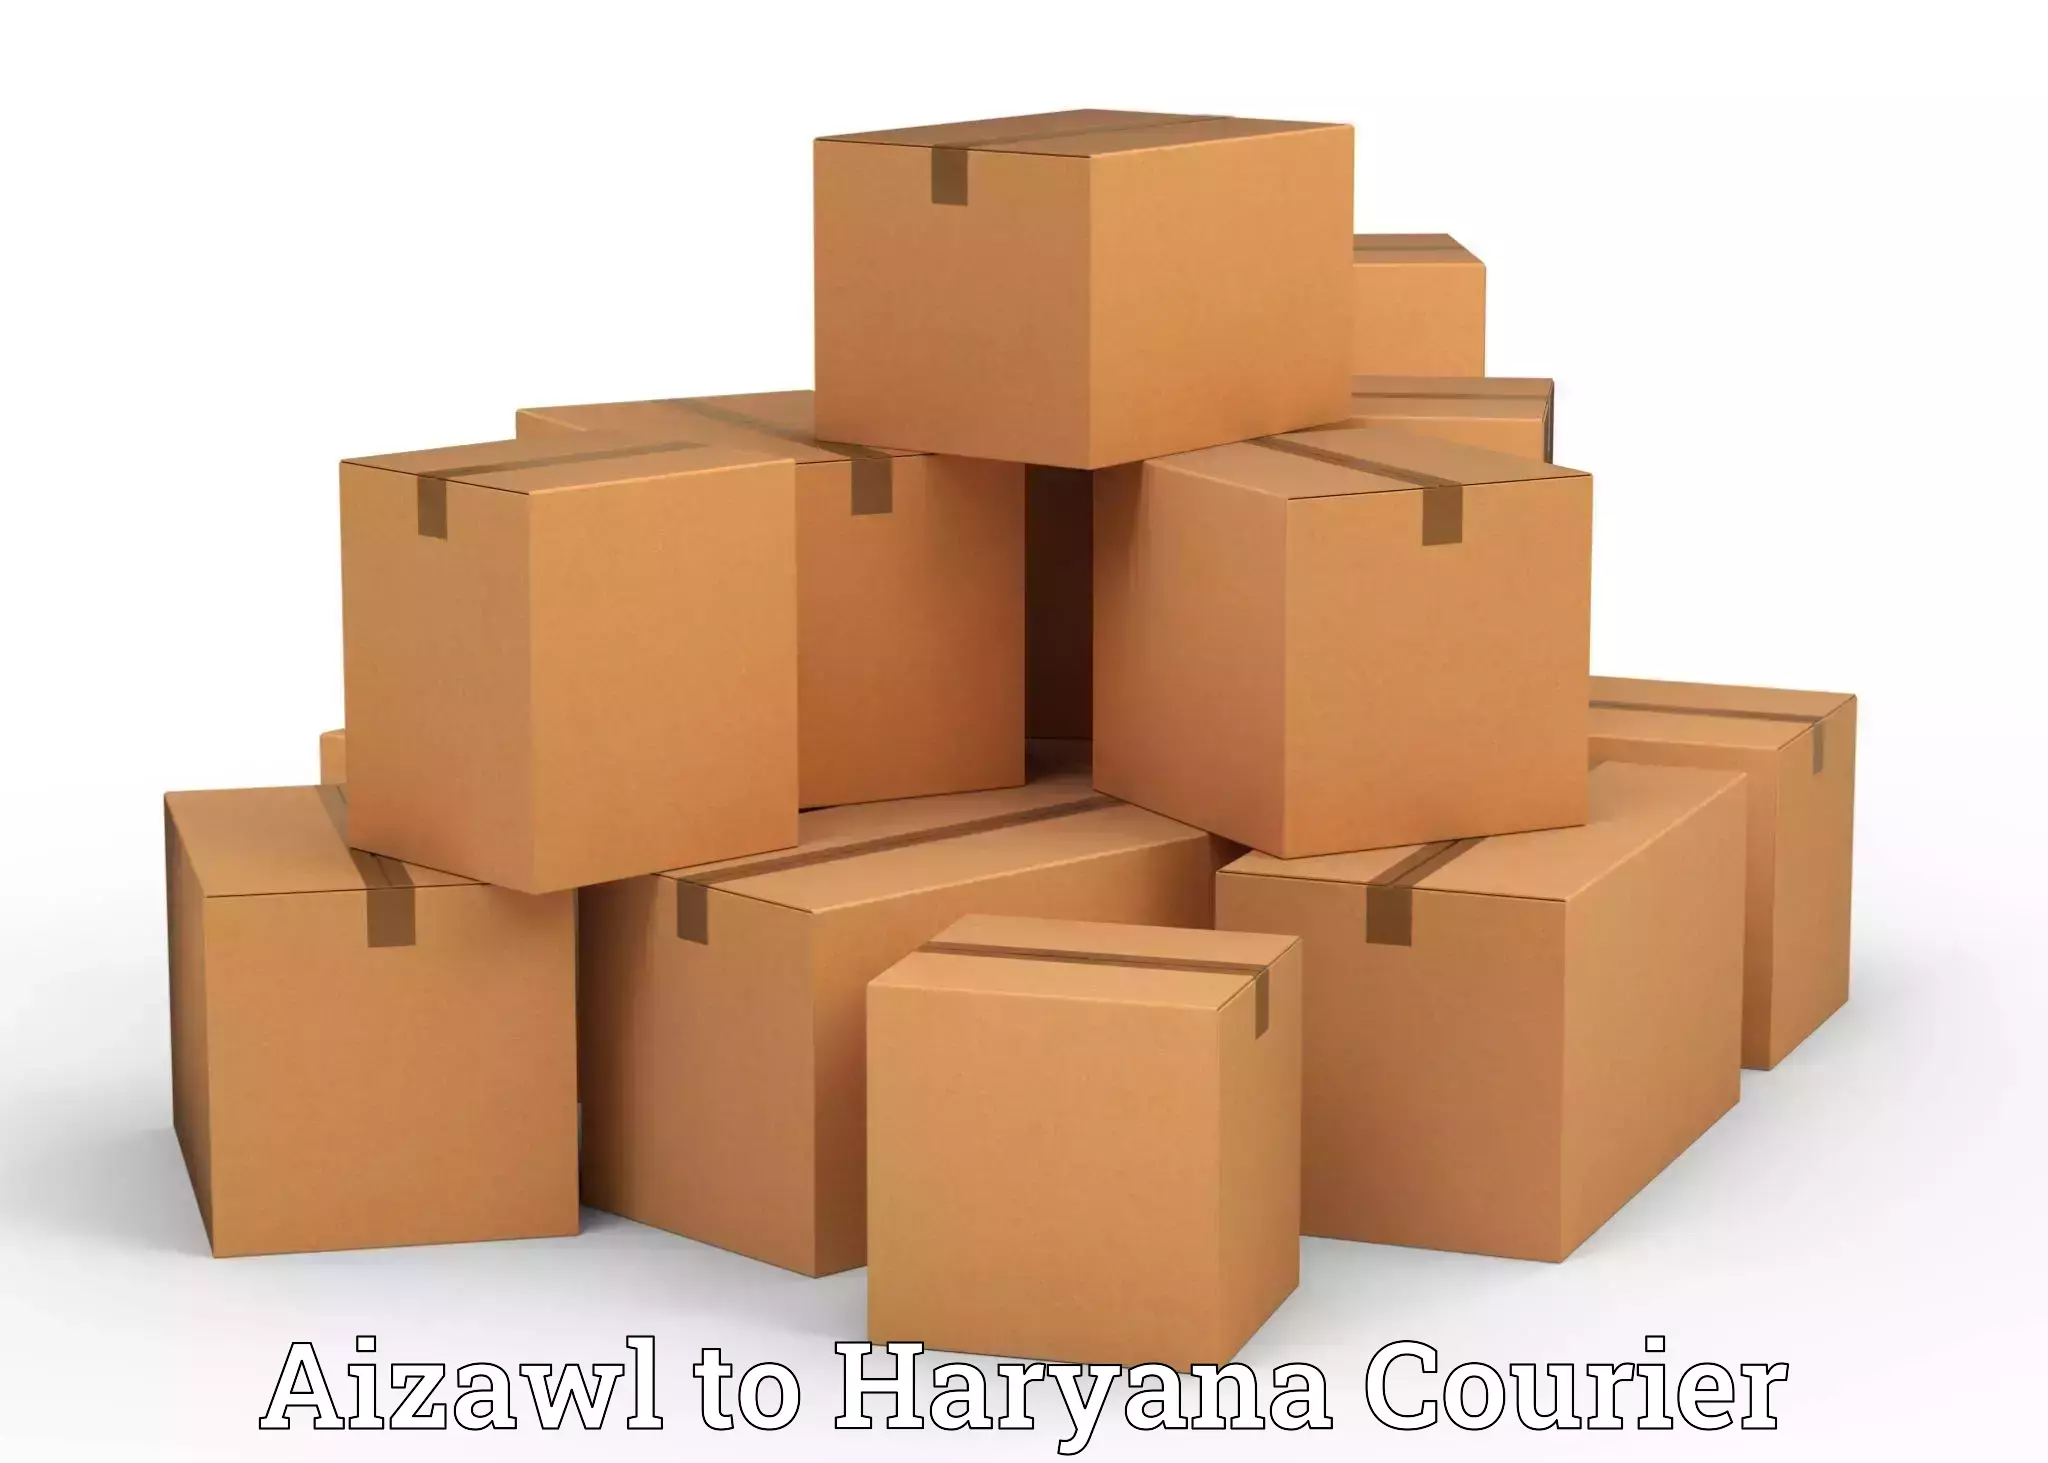 Trusted relocation experts Aizawl to Haryana